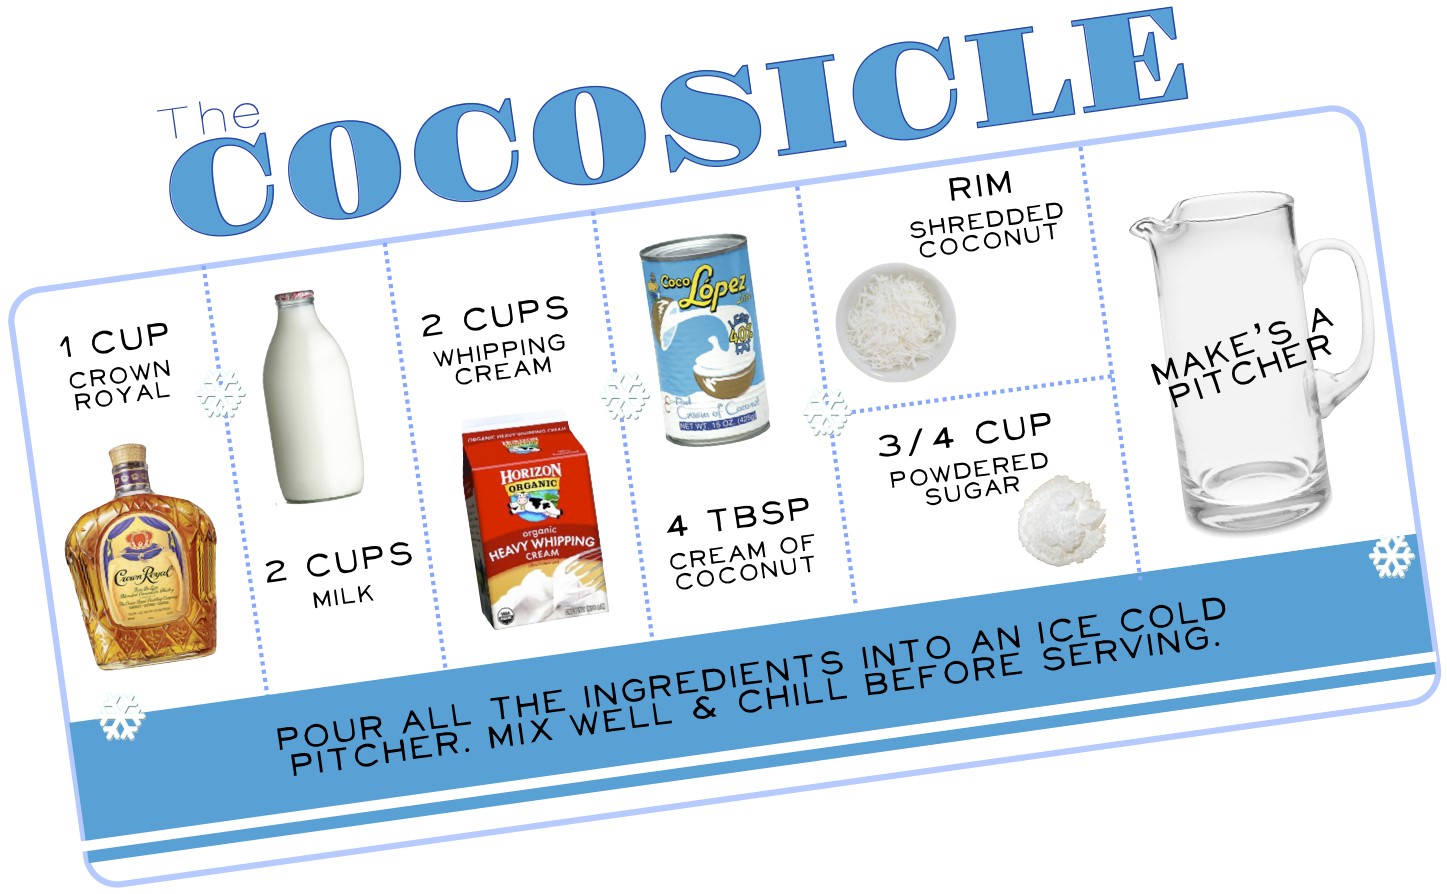 This Bytes: The Cocosicle